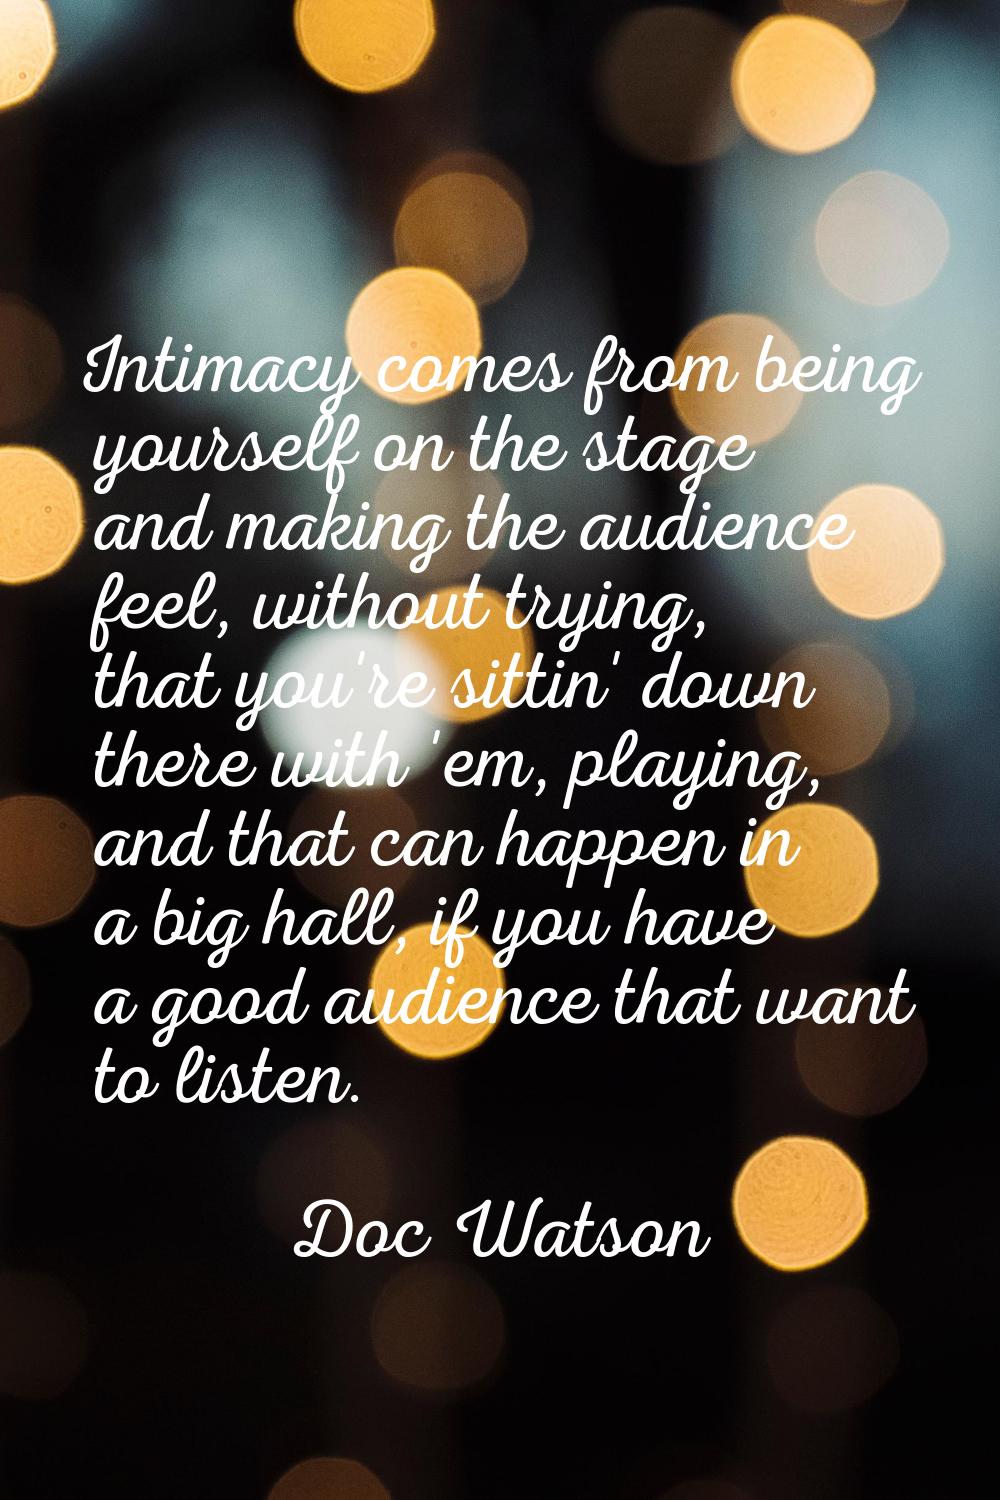 Intimacy comes from being yourself on the stage and making the audience feel, without trying, that 